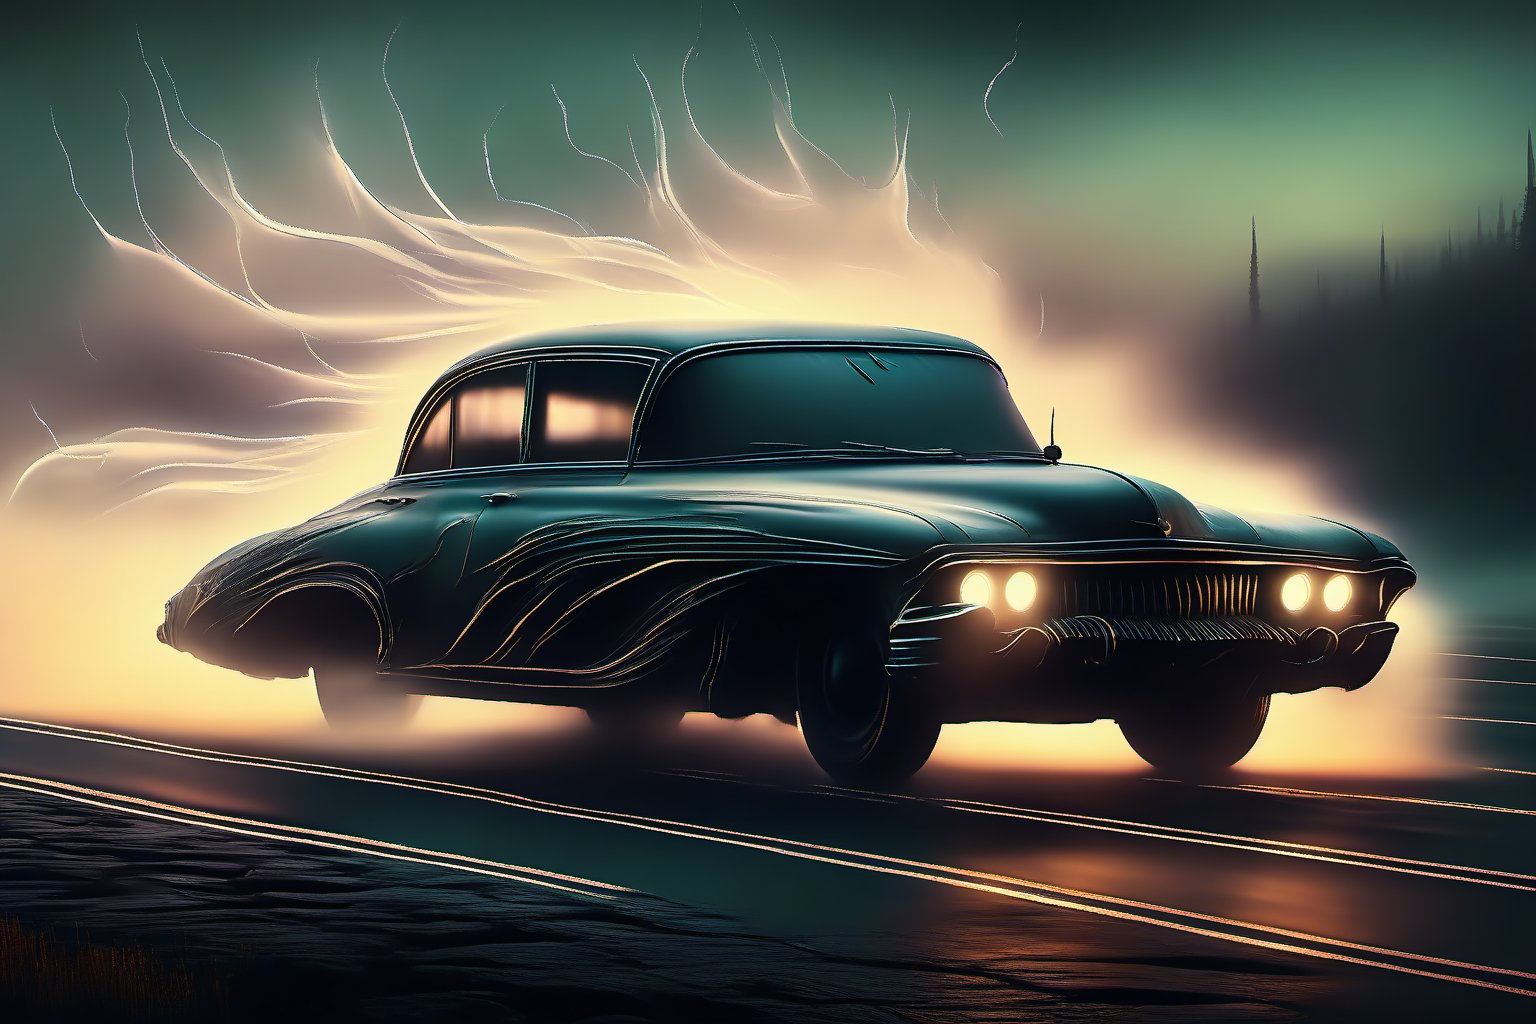 A ghostly sedan drifts eerily along a deserted highway at dusk, headlights flickering like fireflies in the misty veil of darkness. The vehicle's translucent form seems to dissolve into the fog, leaving only an ethereal outline behind.